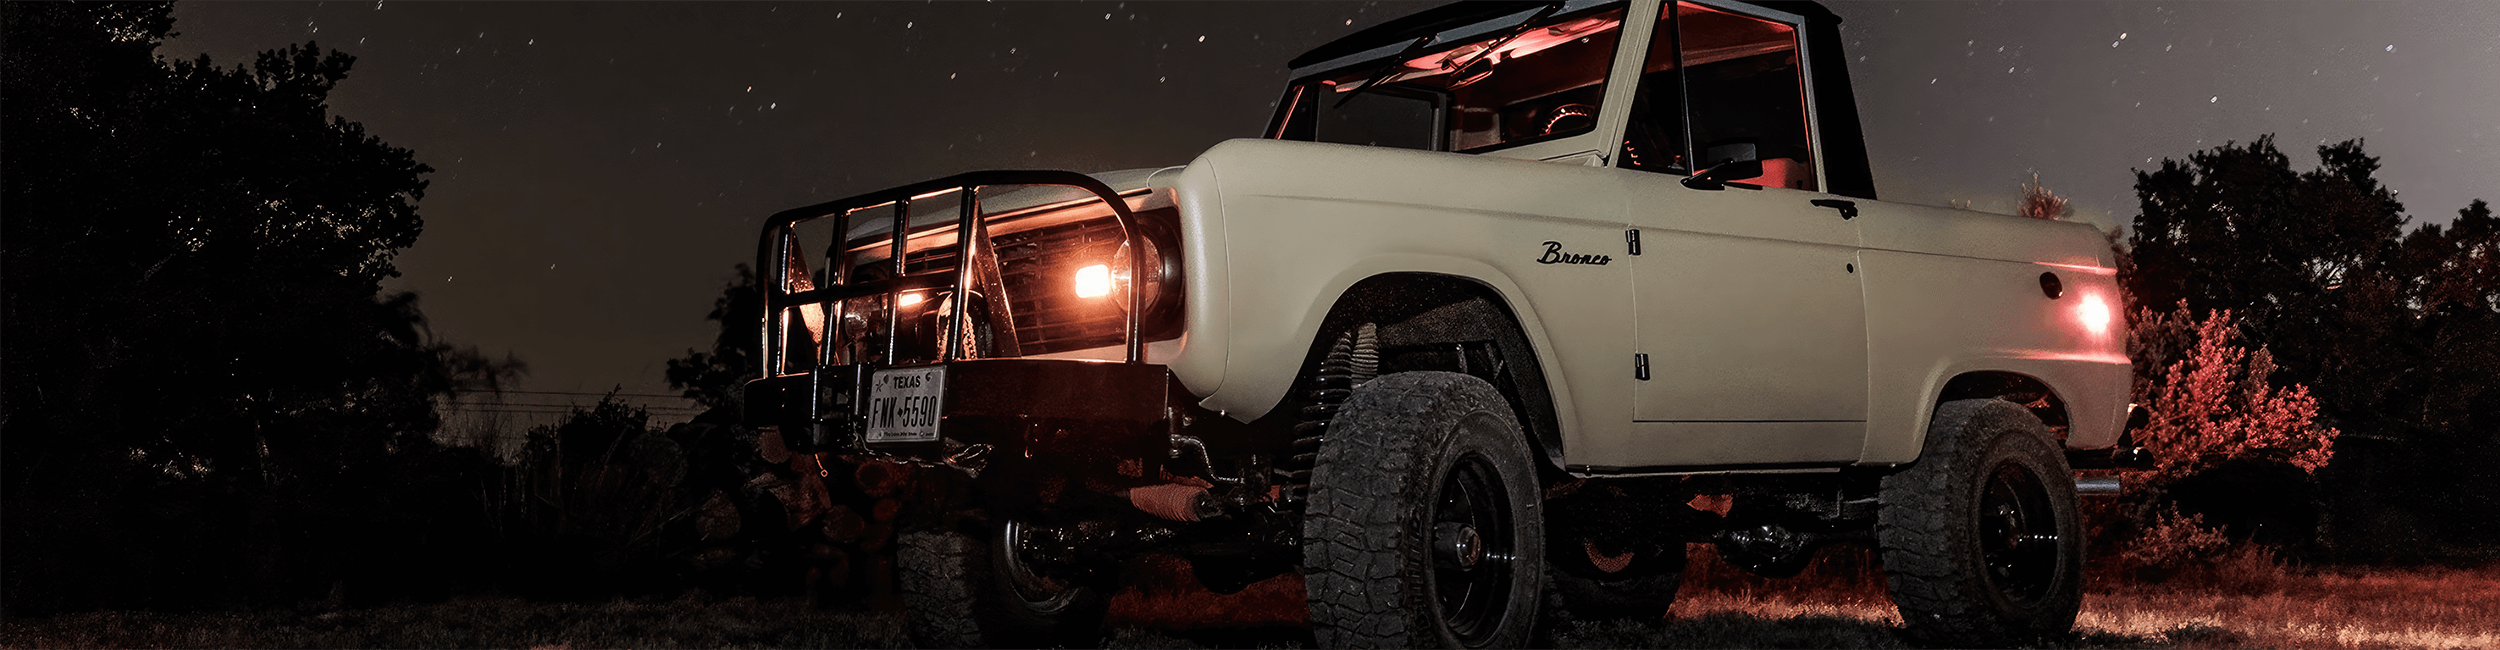 1970 Bronco powered by BluePrint Engines